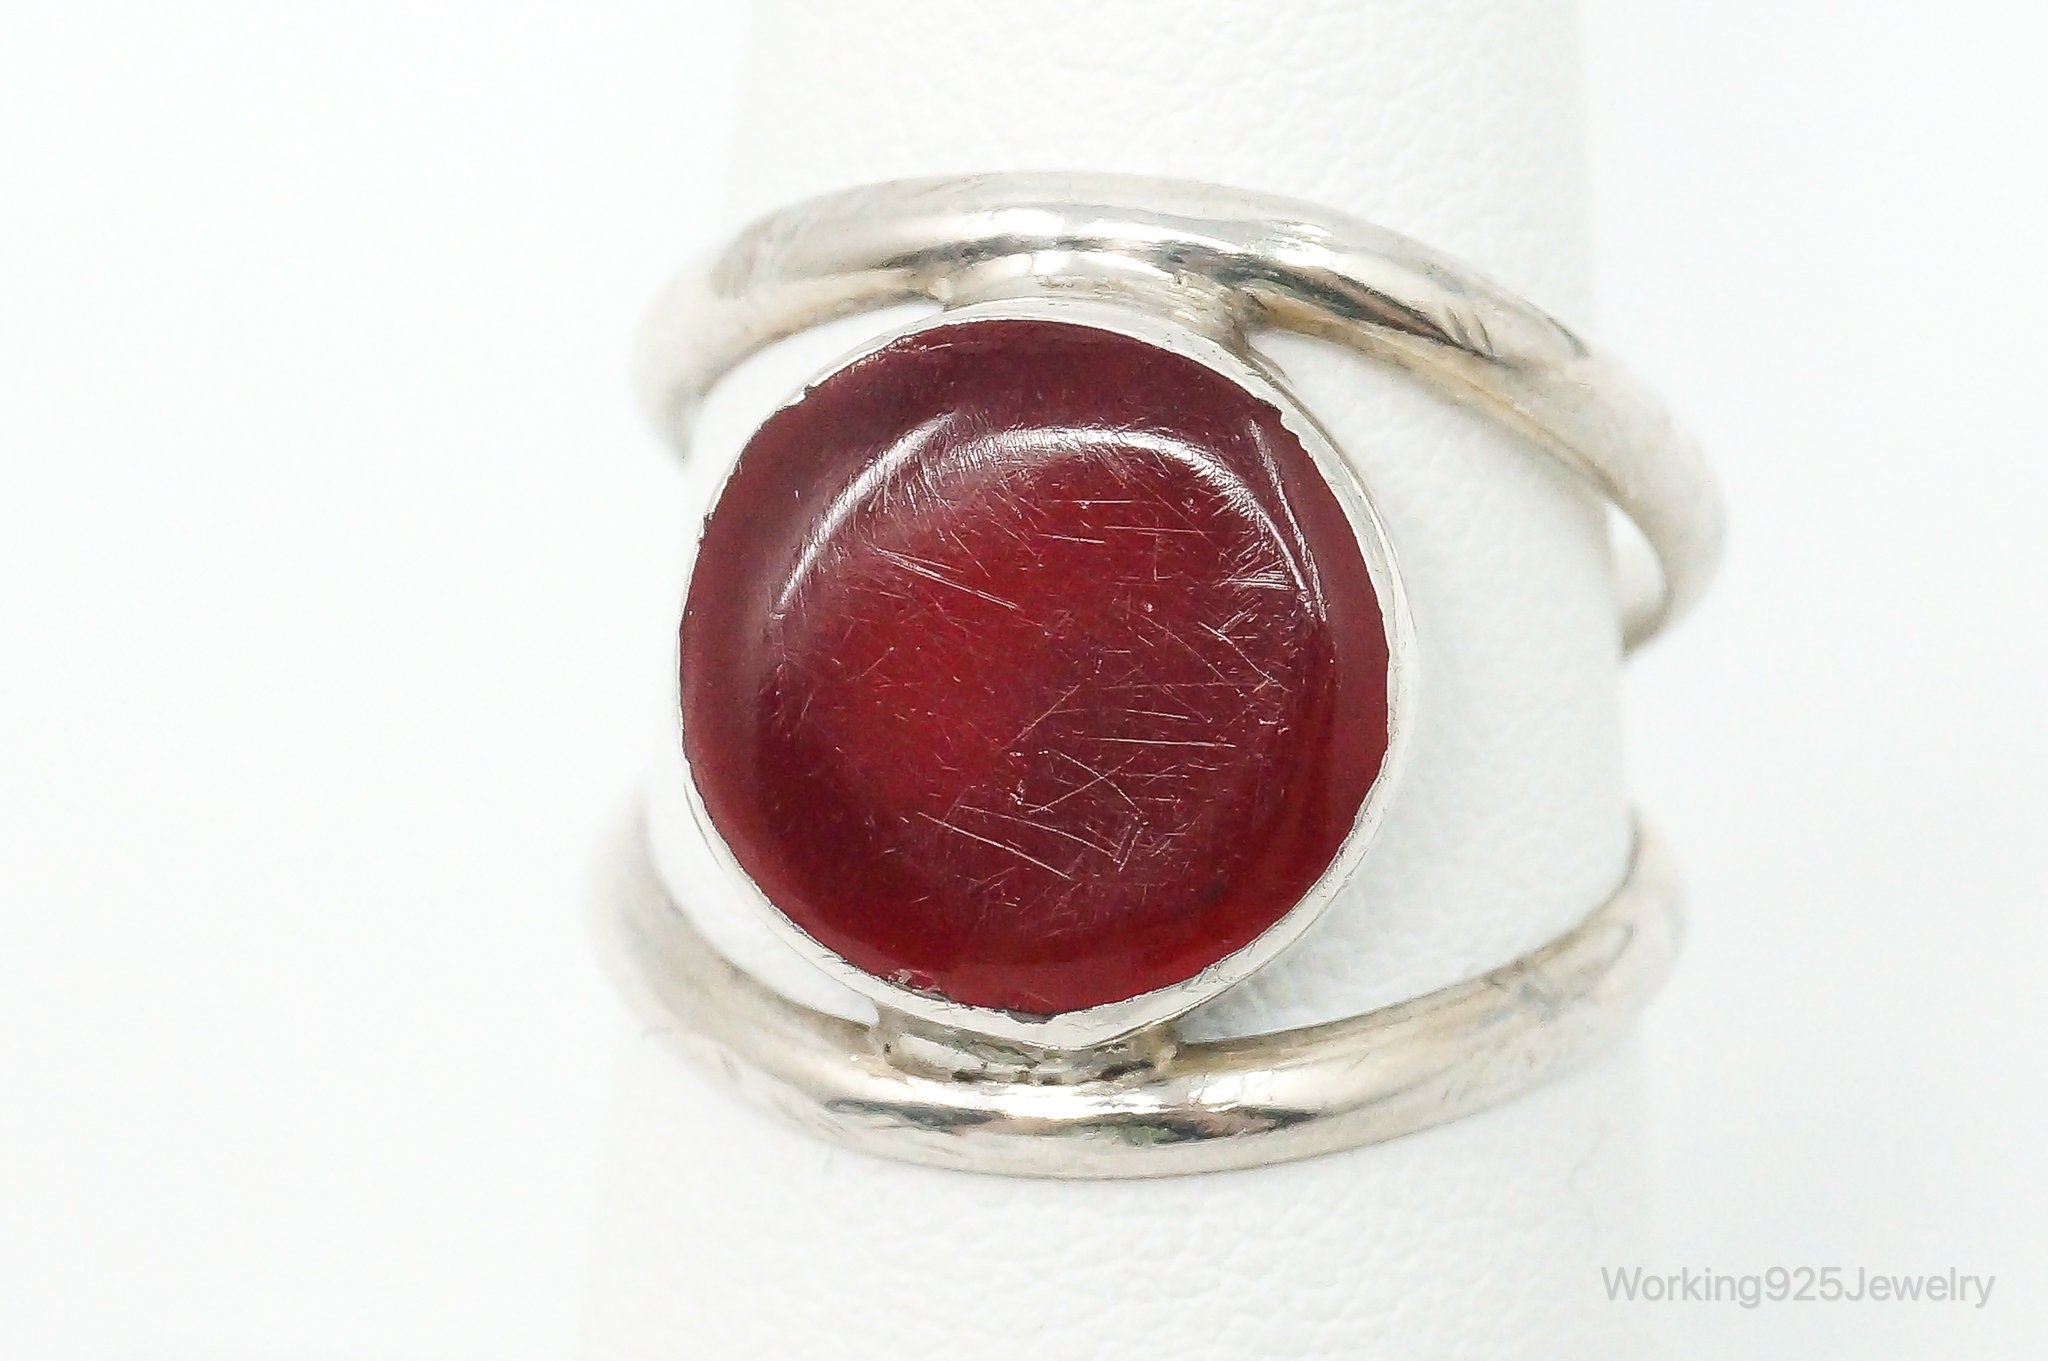 Vintage Mexico Carnelian Sterling Silver Ring - Size 6.75